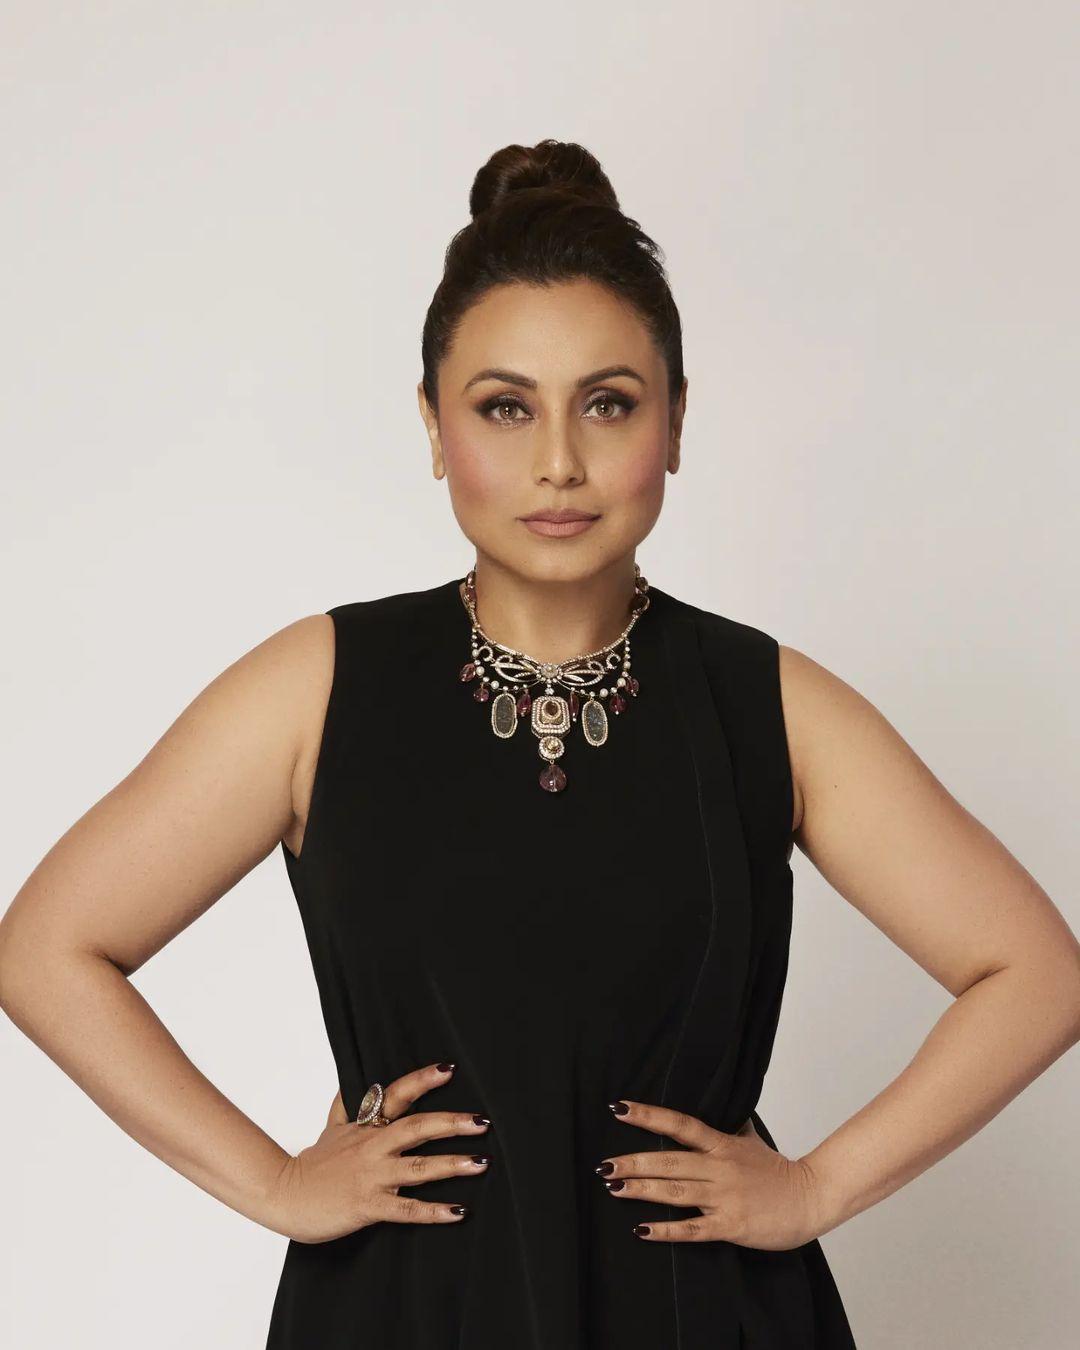 Black is not only her favourite movie from her filmography, it is also a colour that suits Rani beautifully